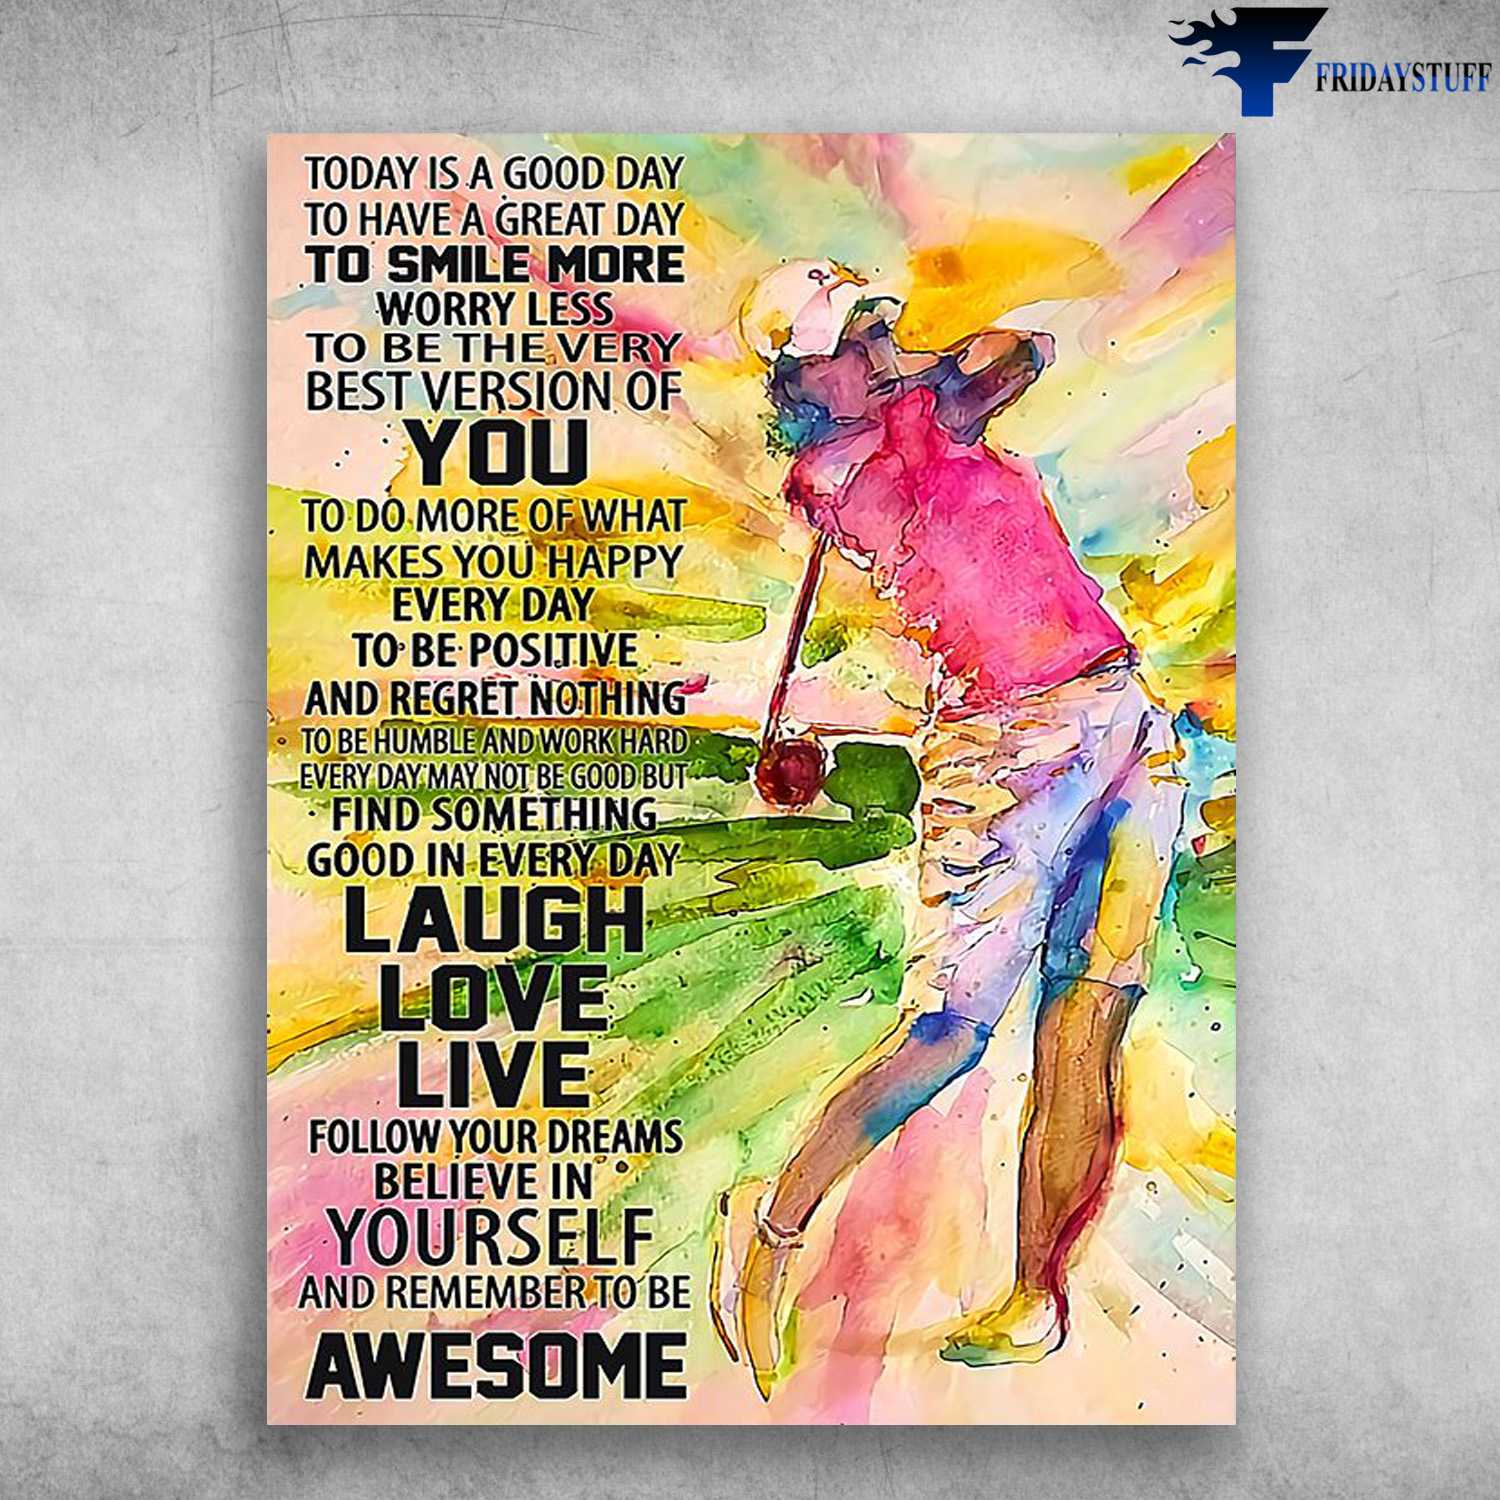 Golf Player, Golf Lover - Today Is A Good Day, To Have A Great Day, To Smile More Worry Less, To Be The Very Best Version Of You